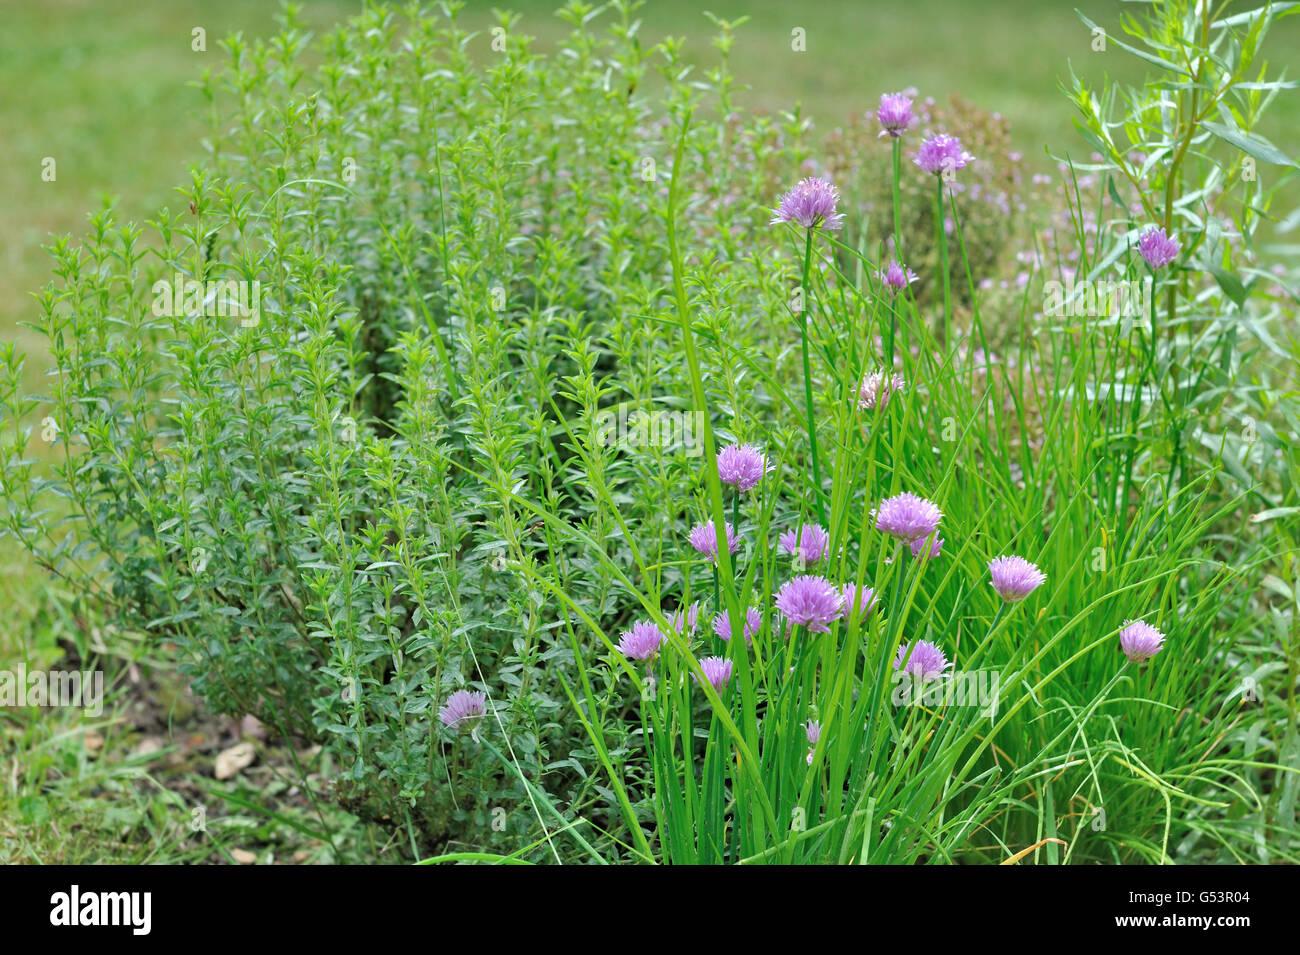 aromatic herbs with chive flowers in a garden Stock Photo